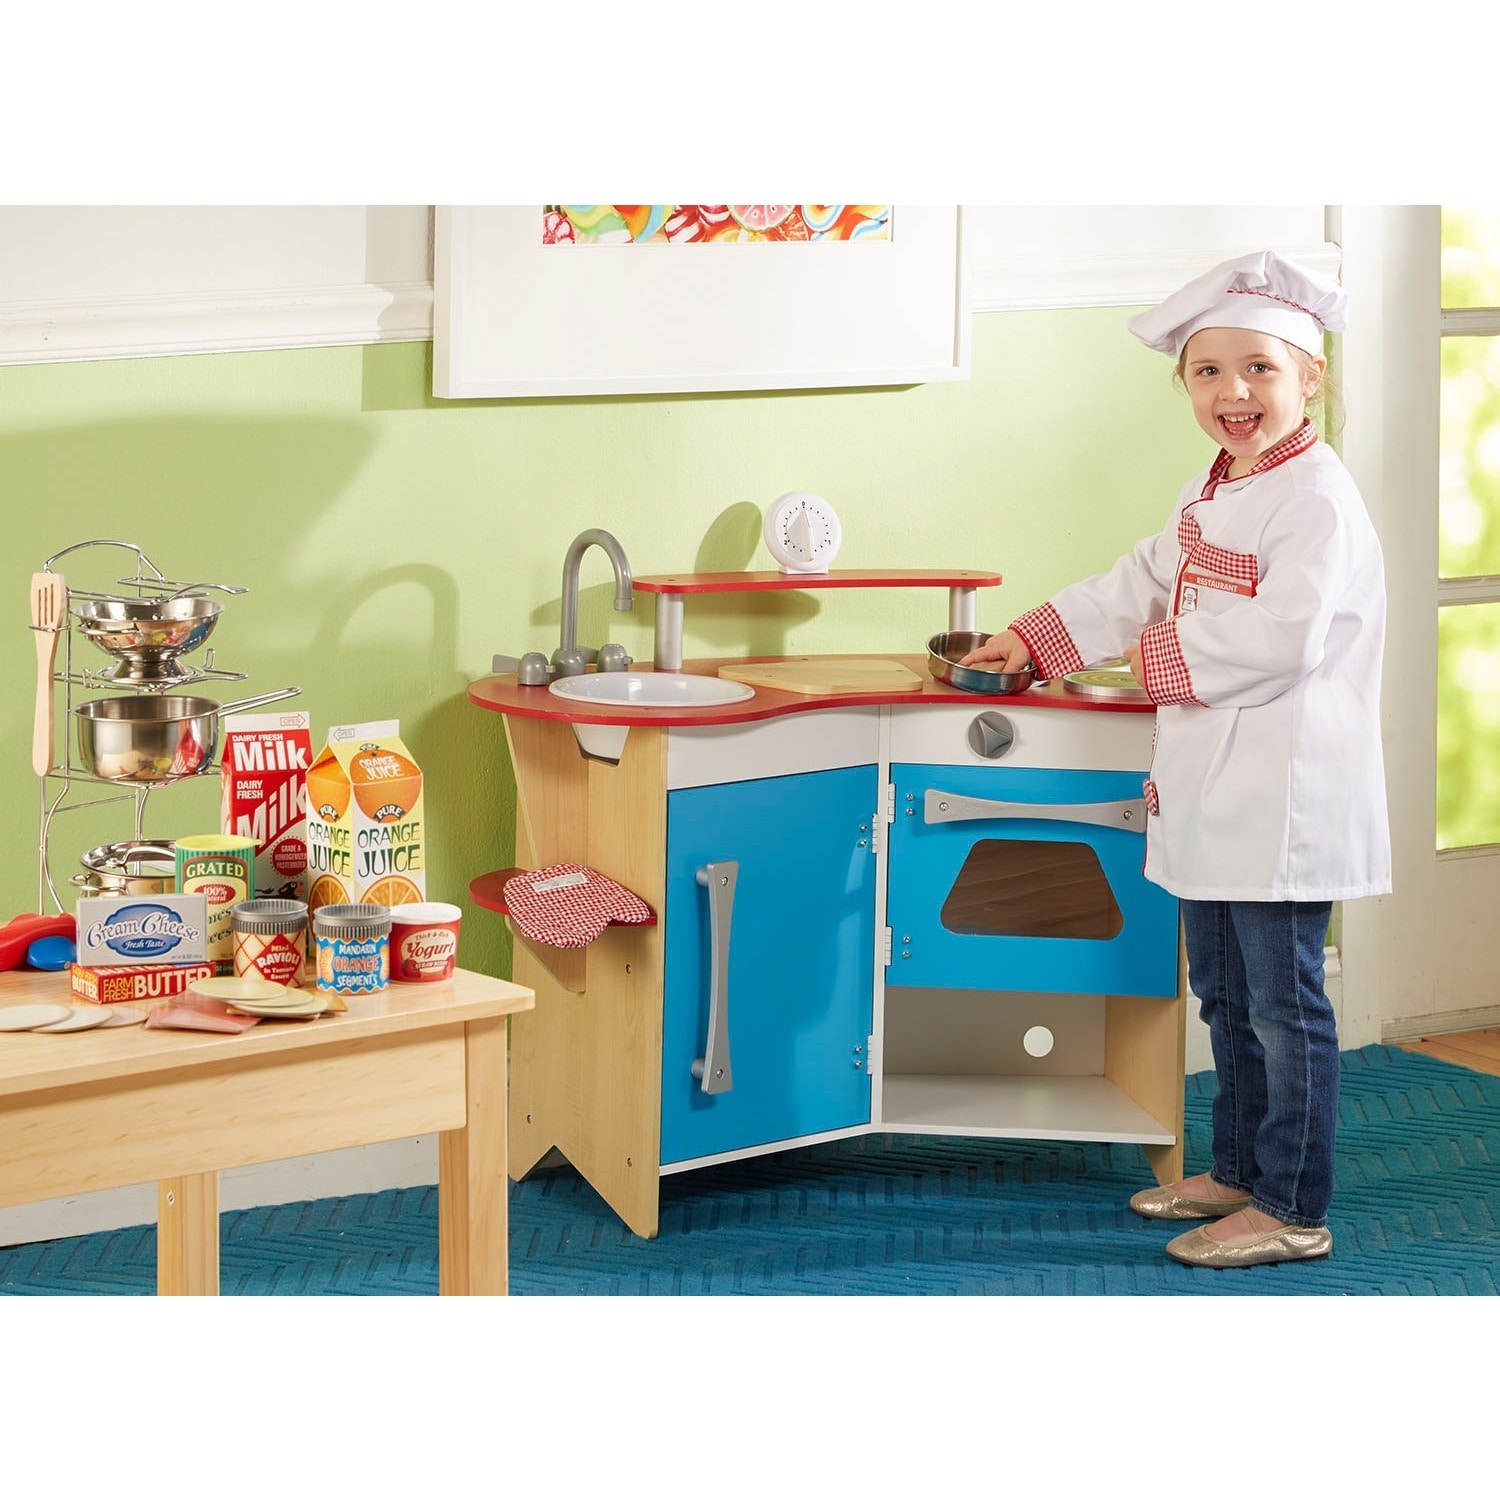 Melissa & Doug Cook's Corner Wooden Kitchen Free Shipping Today